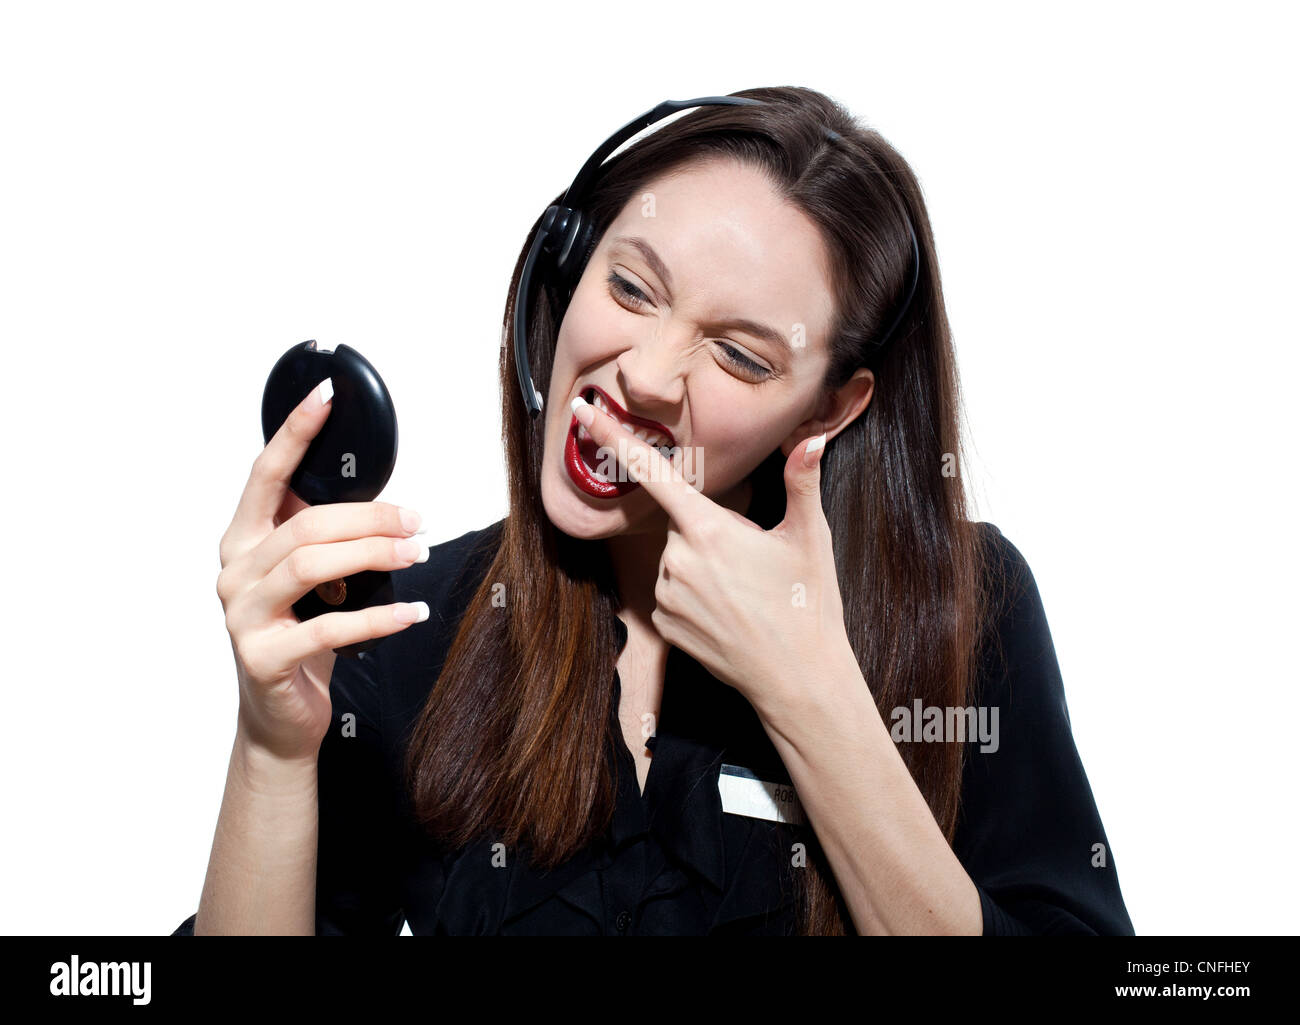 Woman with headset, wiping lipstick off her teeth Stock Photo